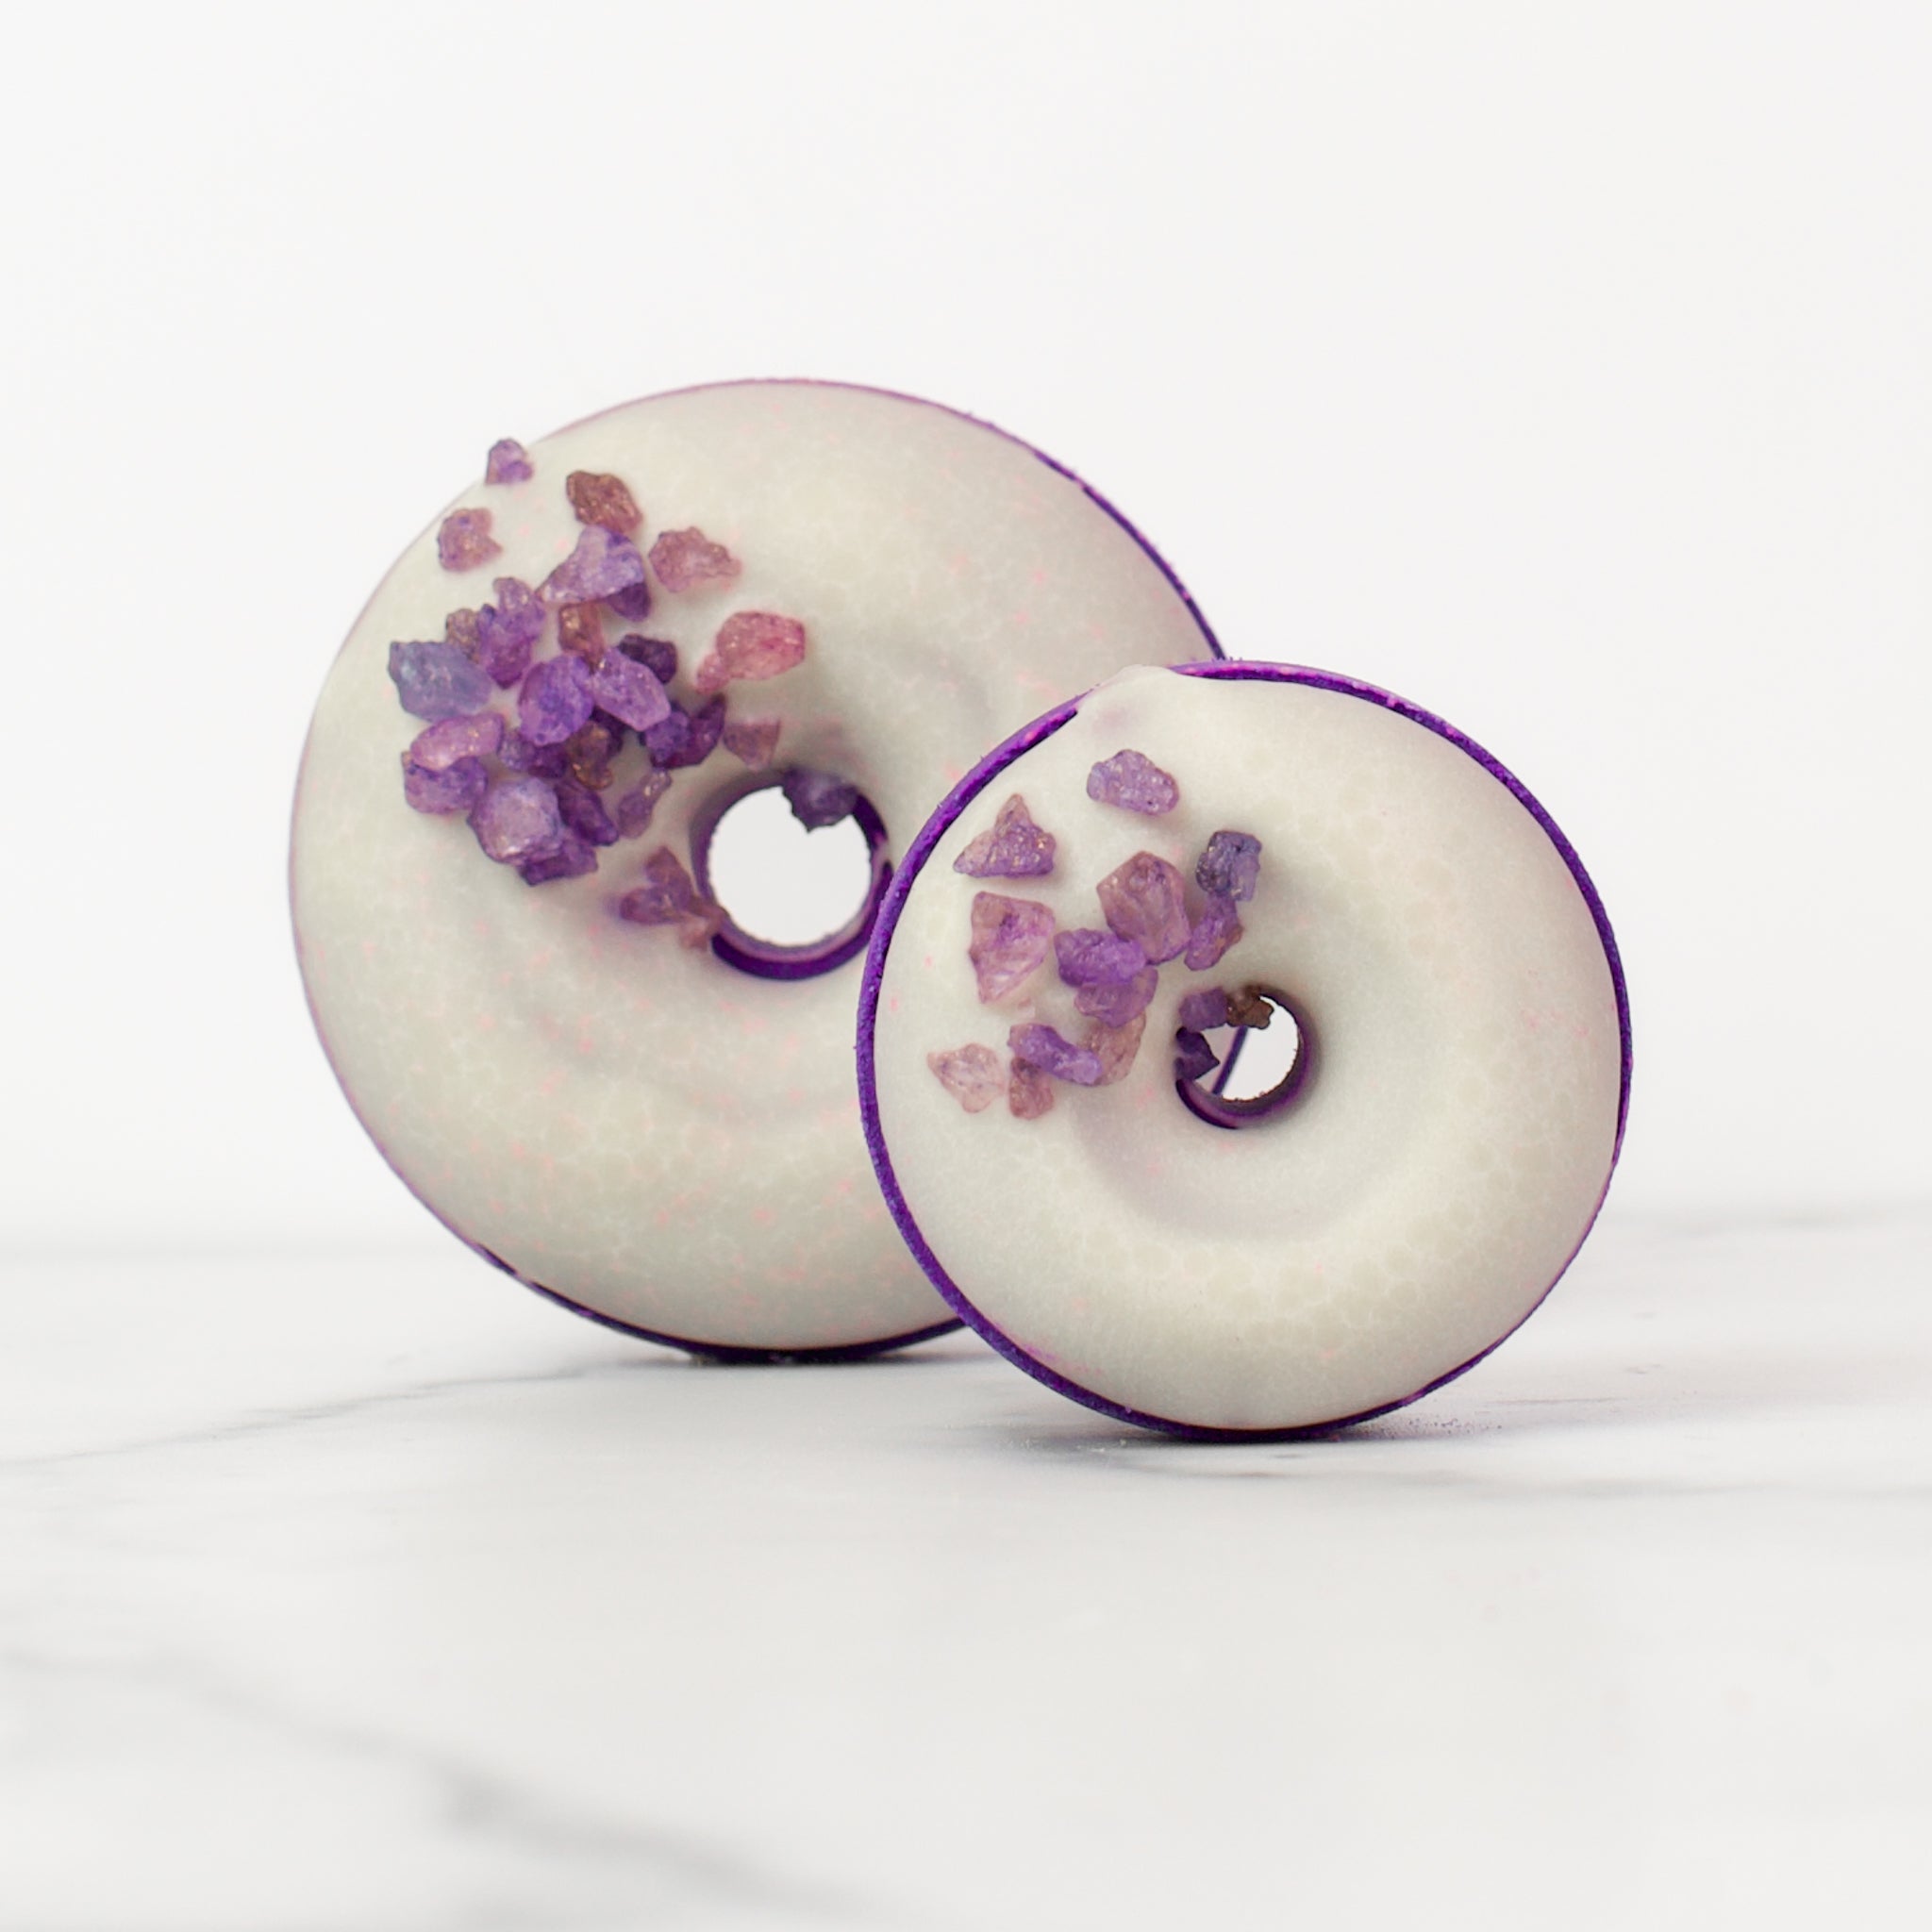 One large and one small donut Moonflower bath bombs on a white background. Moonflower is a dark purple bath bomb with a white glaze and purple gemstone sprinkles.